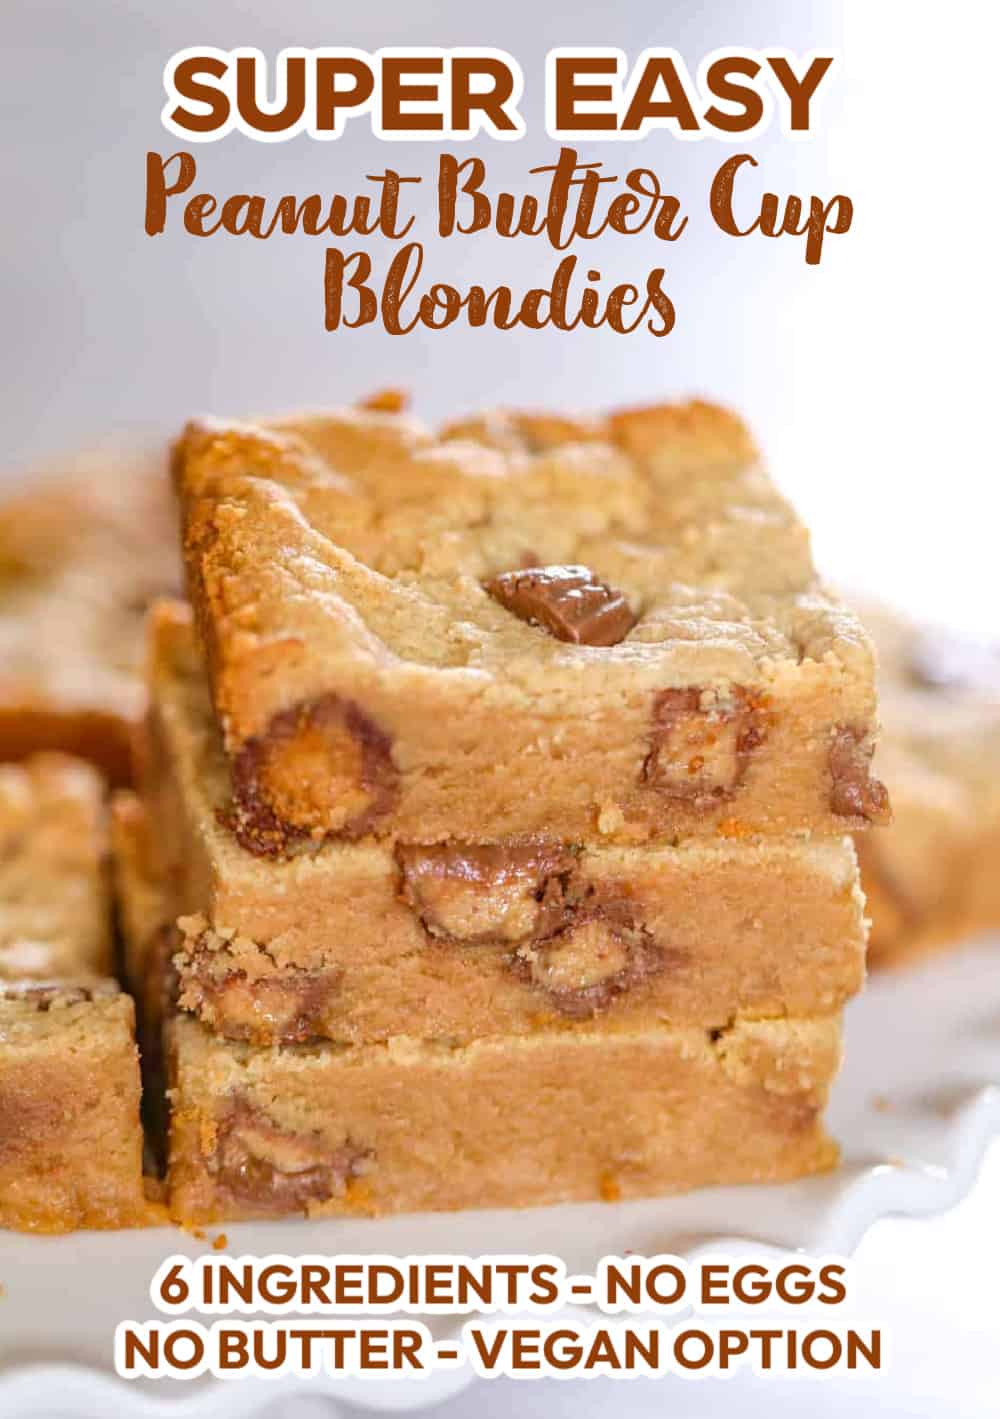 Peanut Butter Cup Blondies recipe with no eggs, no butter - vegan option